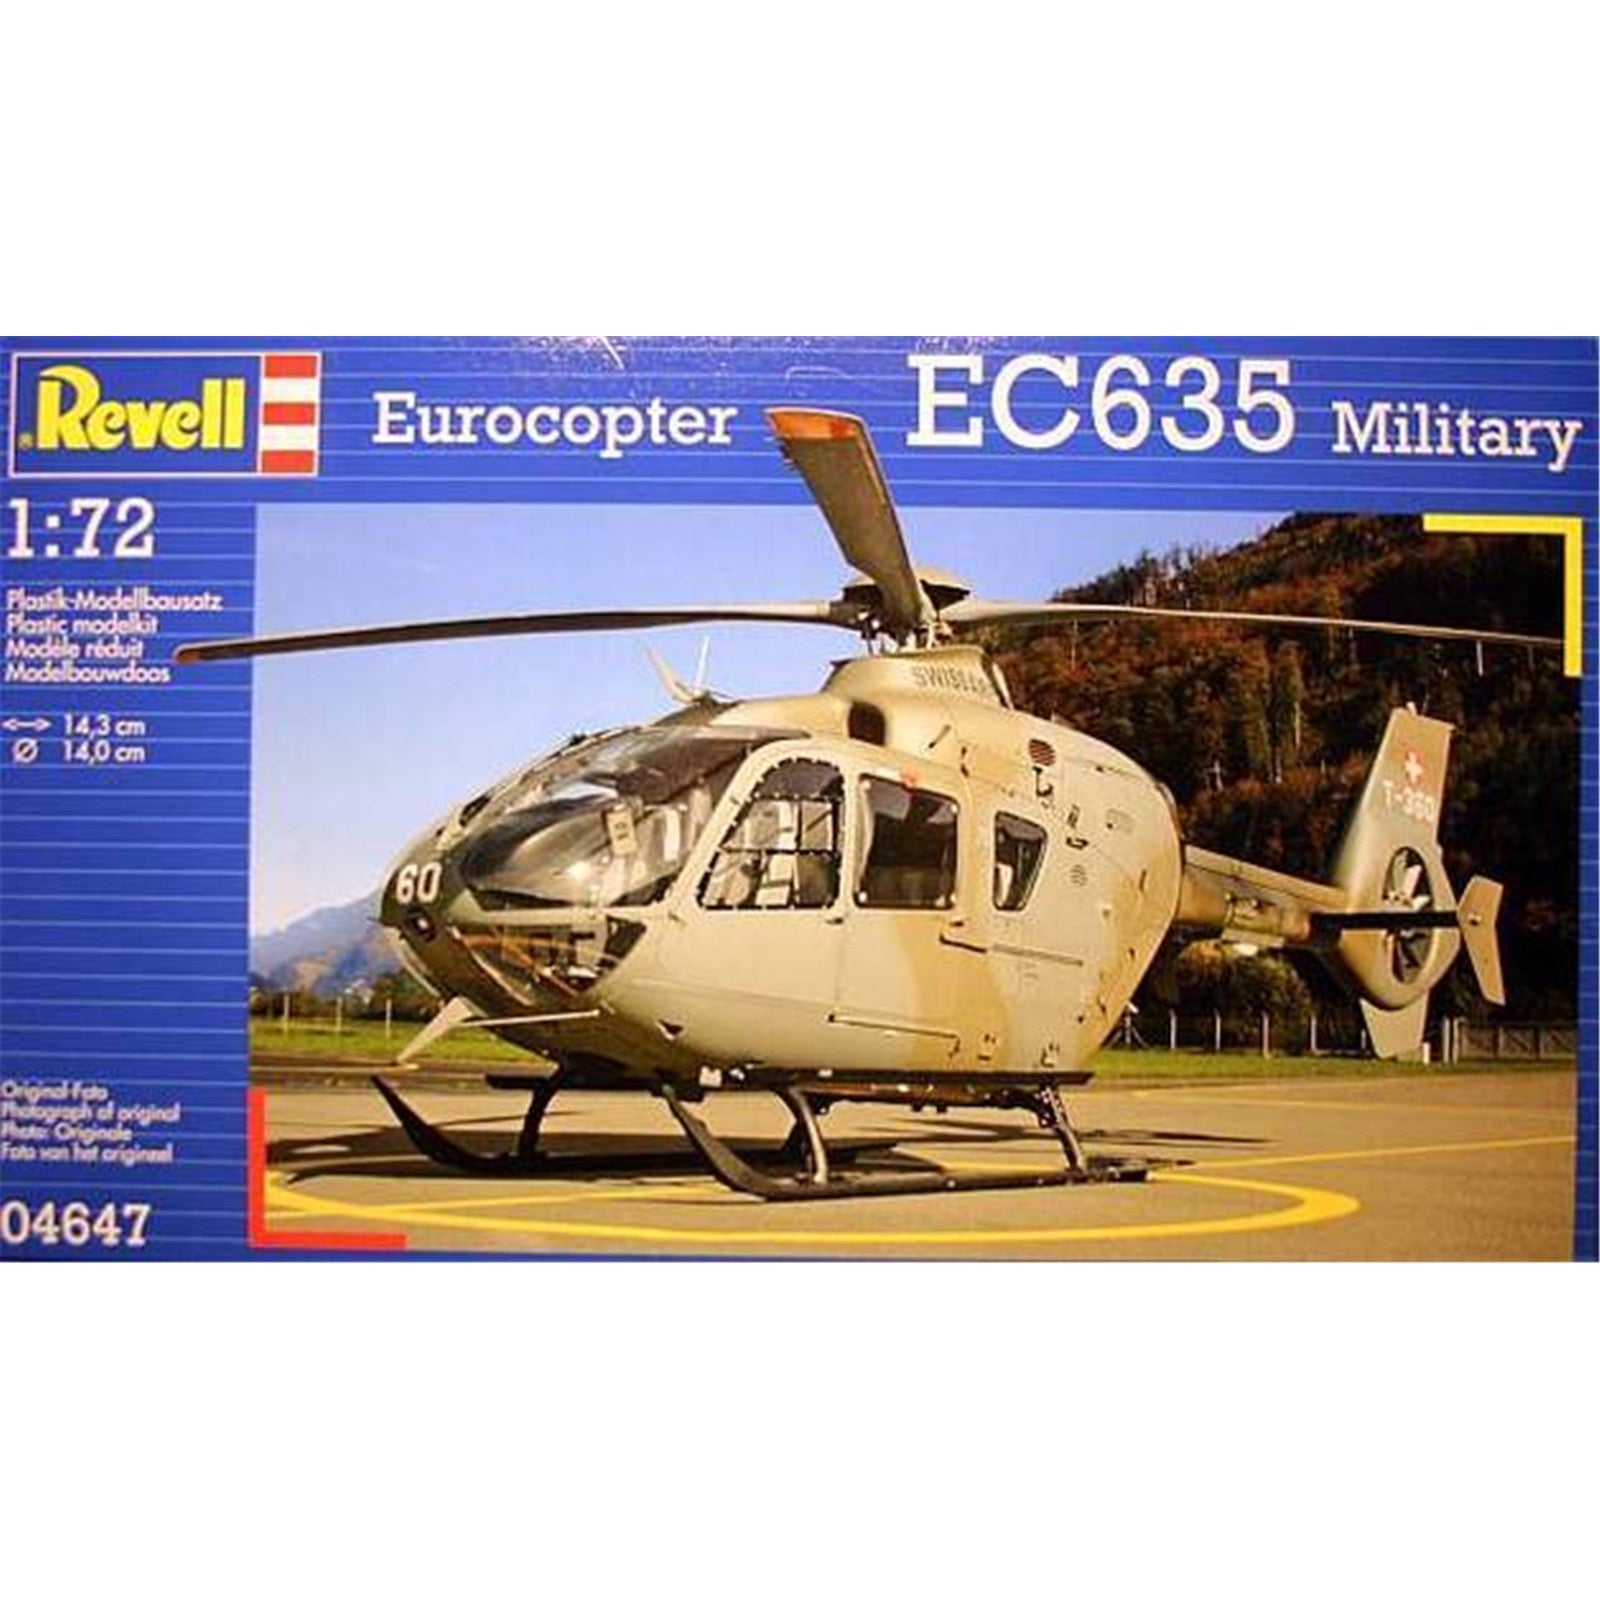 Eurocopter EC635 Military 1/72 by Revell